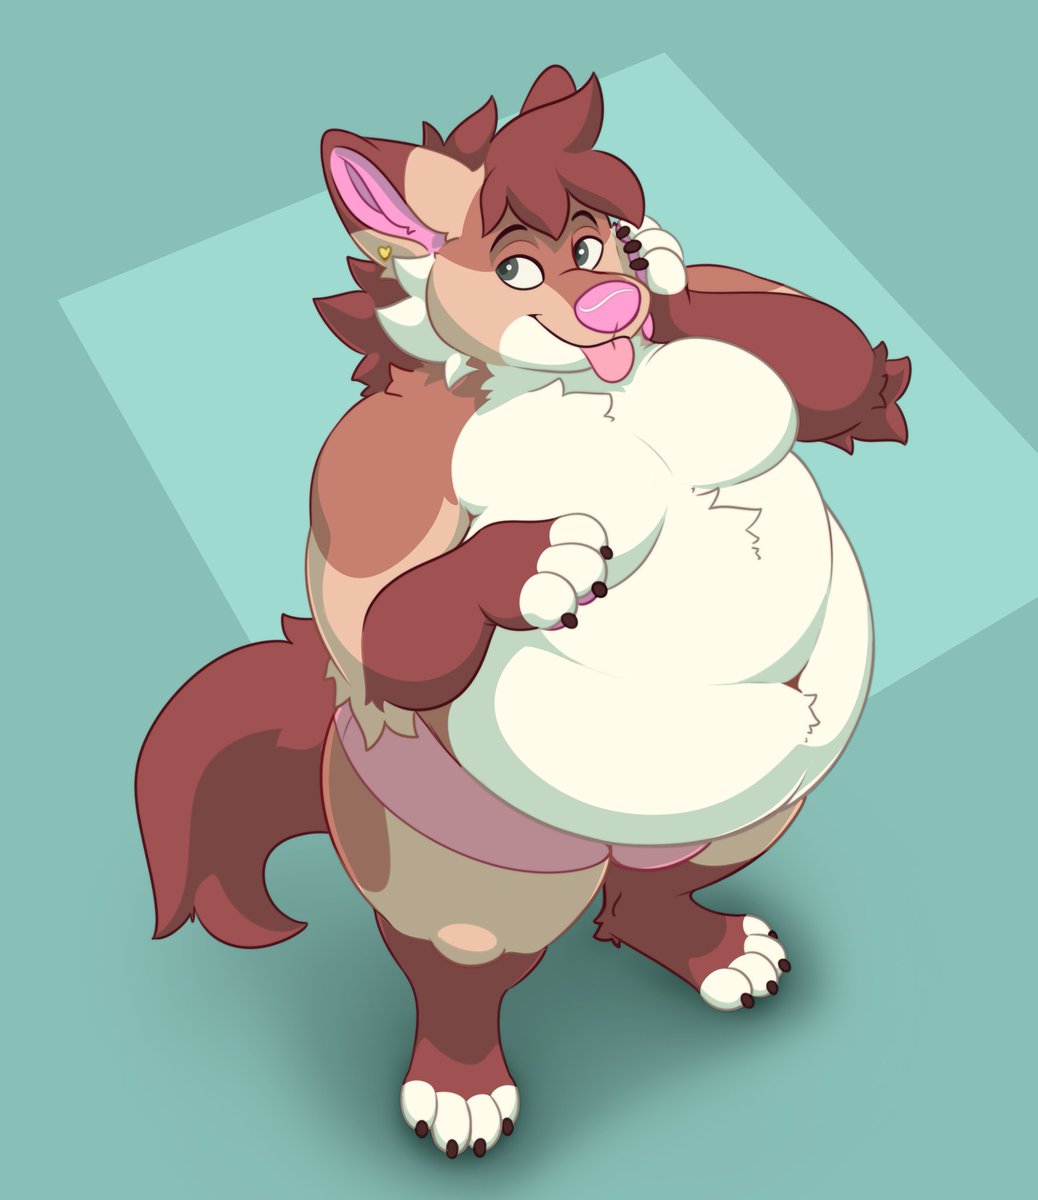 Well look at that cute friend-shaped puppy! My part of tye trade I did with @blushysnoots